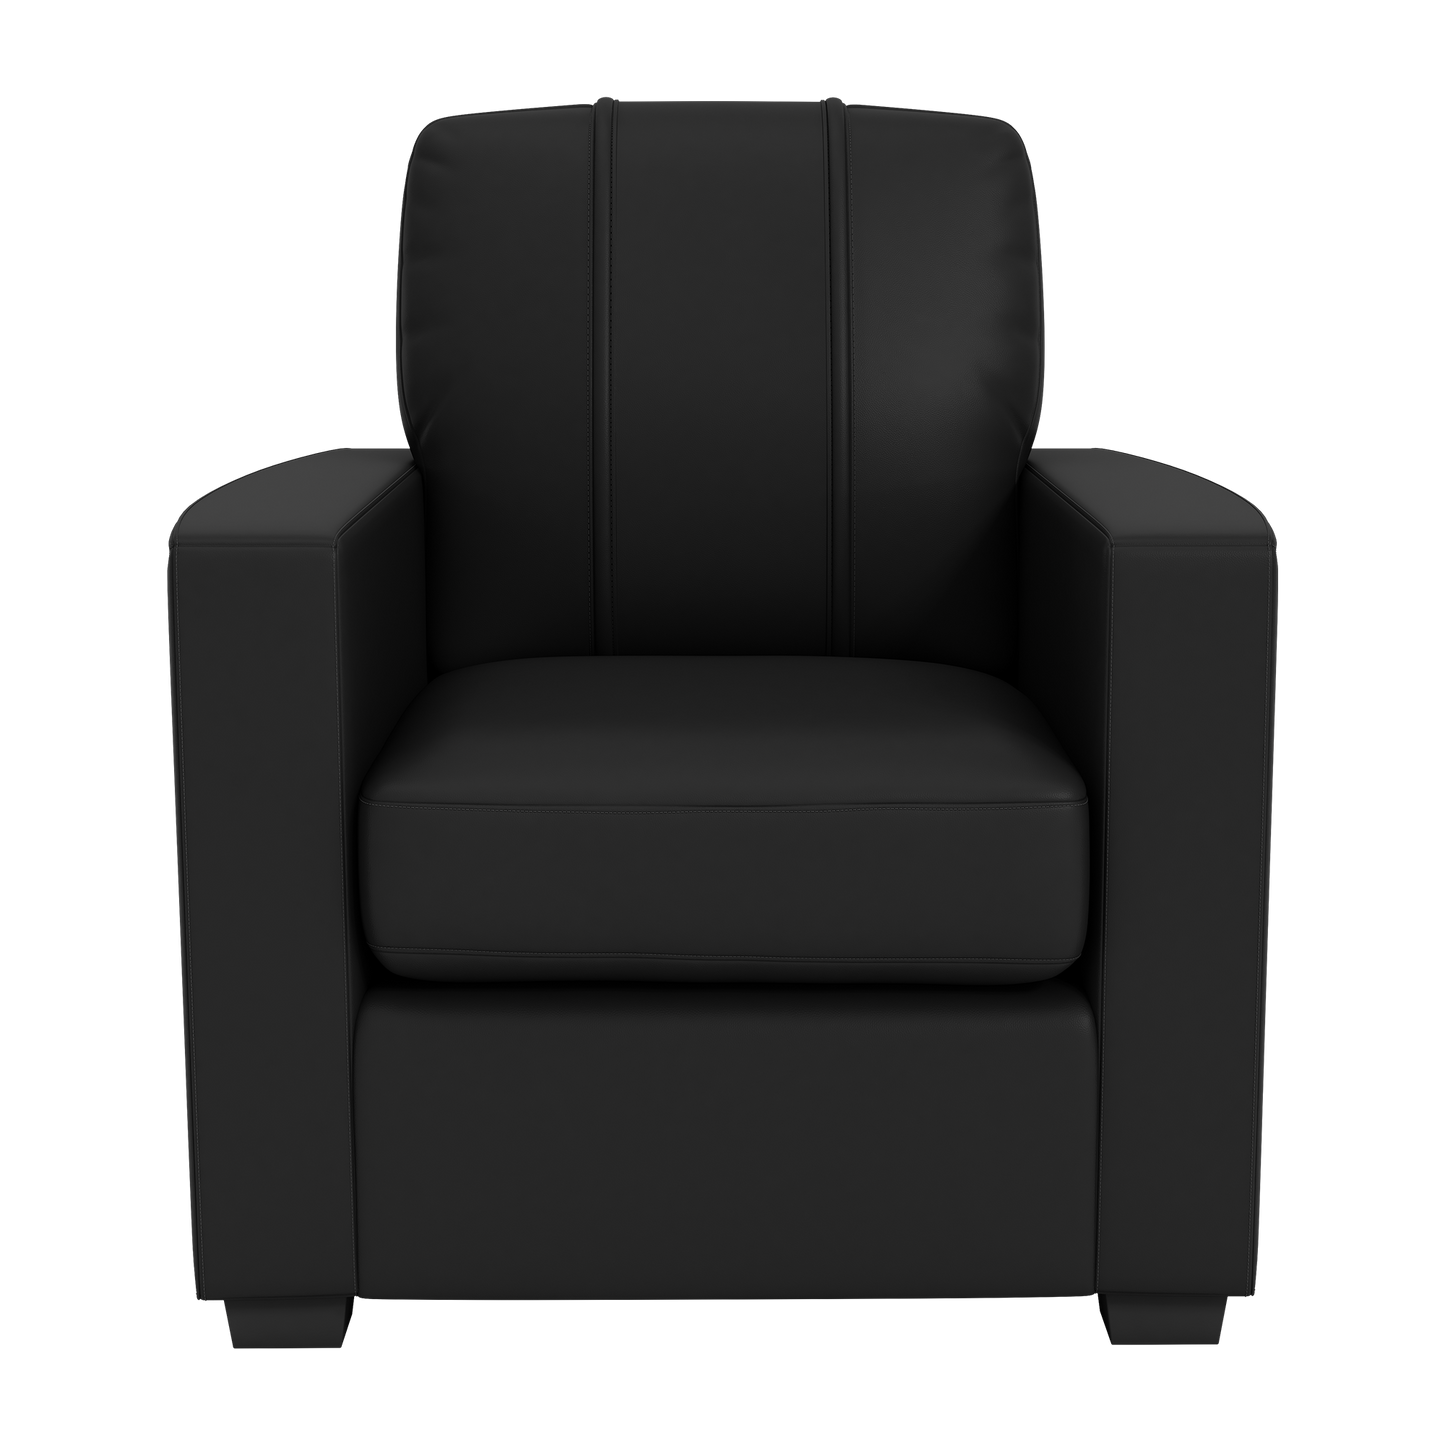 Silver Club Chair with Boxing Gloves Logo Panel